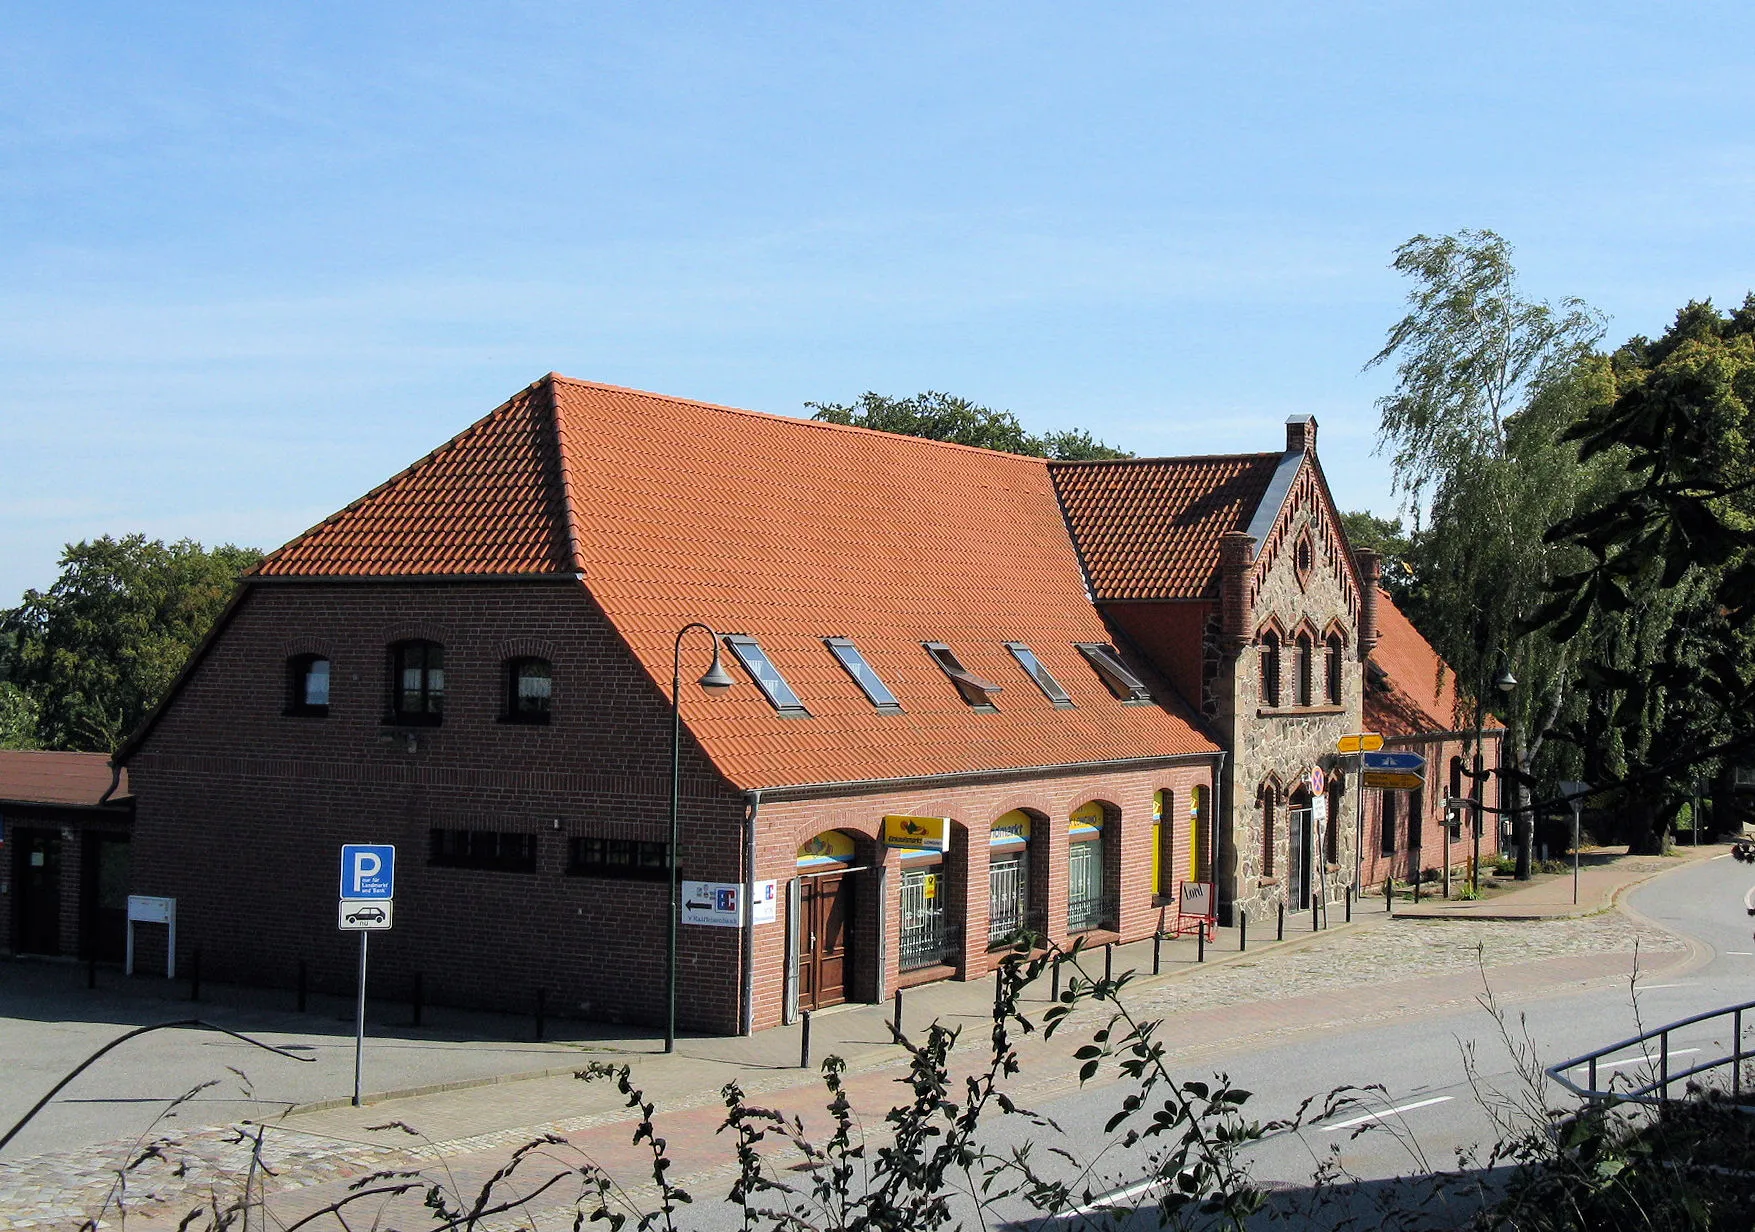 Photo showing: House with cultural heritage managed middle risalit in Kirch Grubenhagen, disctrict Müritz, Mecklenburg-Vorpommern, Germany